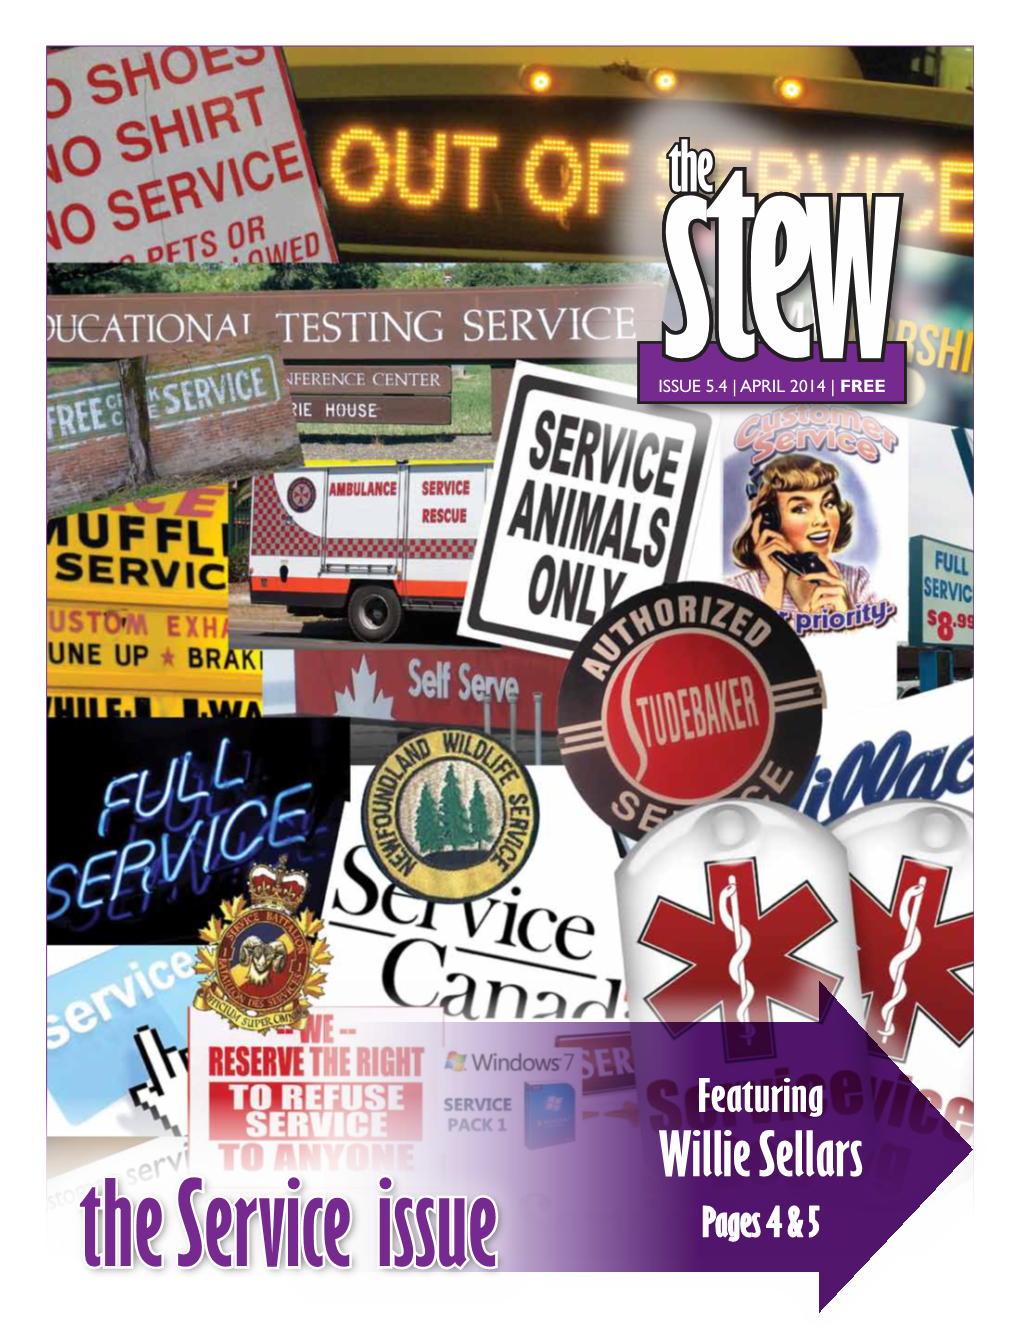 Willie Sellars the Service Issue Pages 4 & 5 PAGE 2 | the STEW Magazine | April 2014 Hear We Want to Hear from You! Email Craig@Thestew.Ca